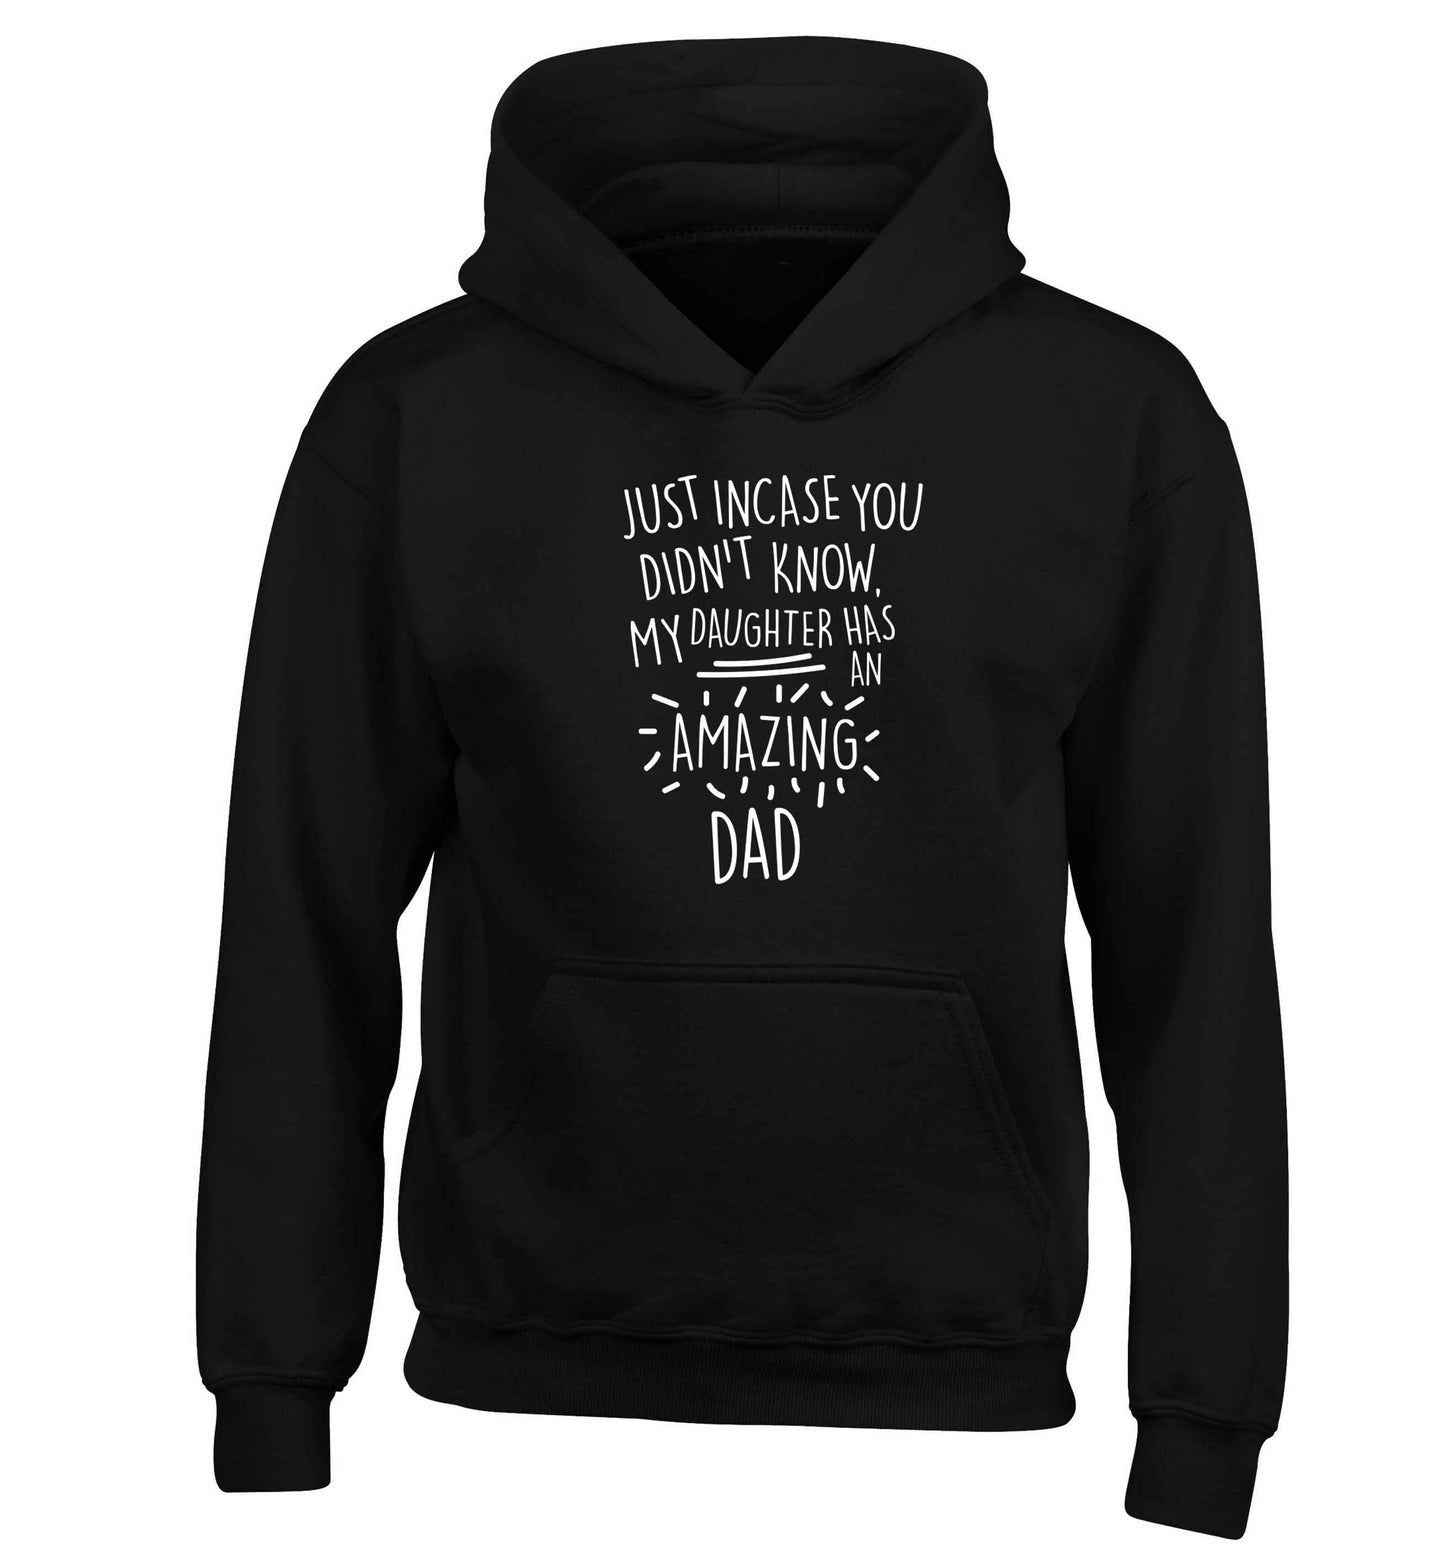 Just incase you didn't know my daughter has an amazing dad children's black hoodie 12-13 Years